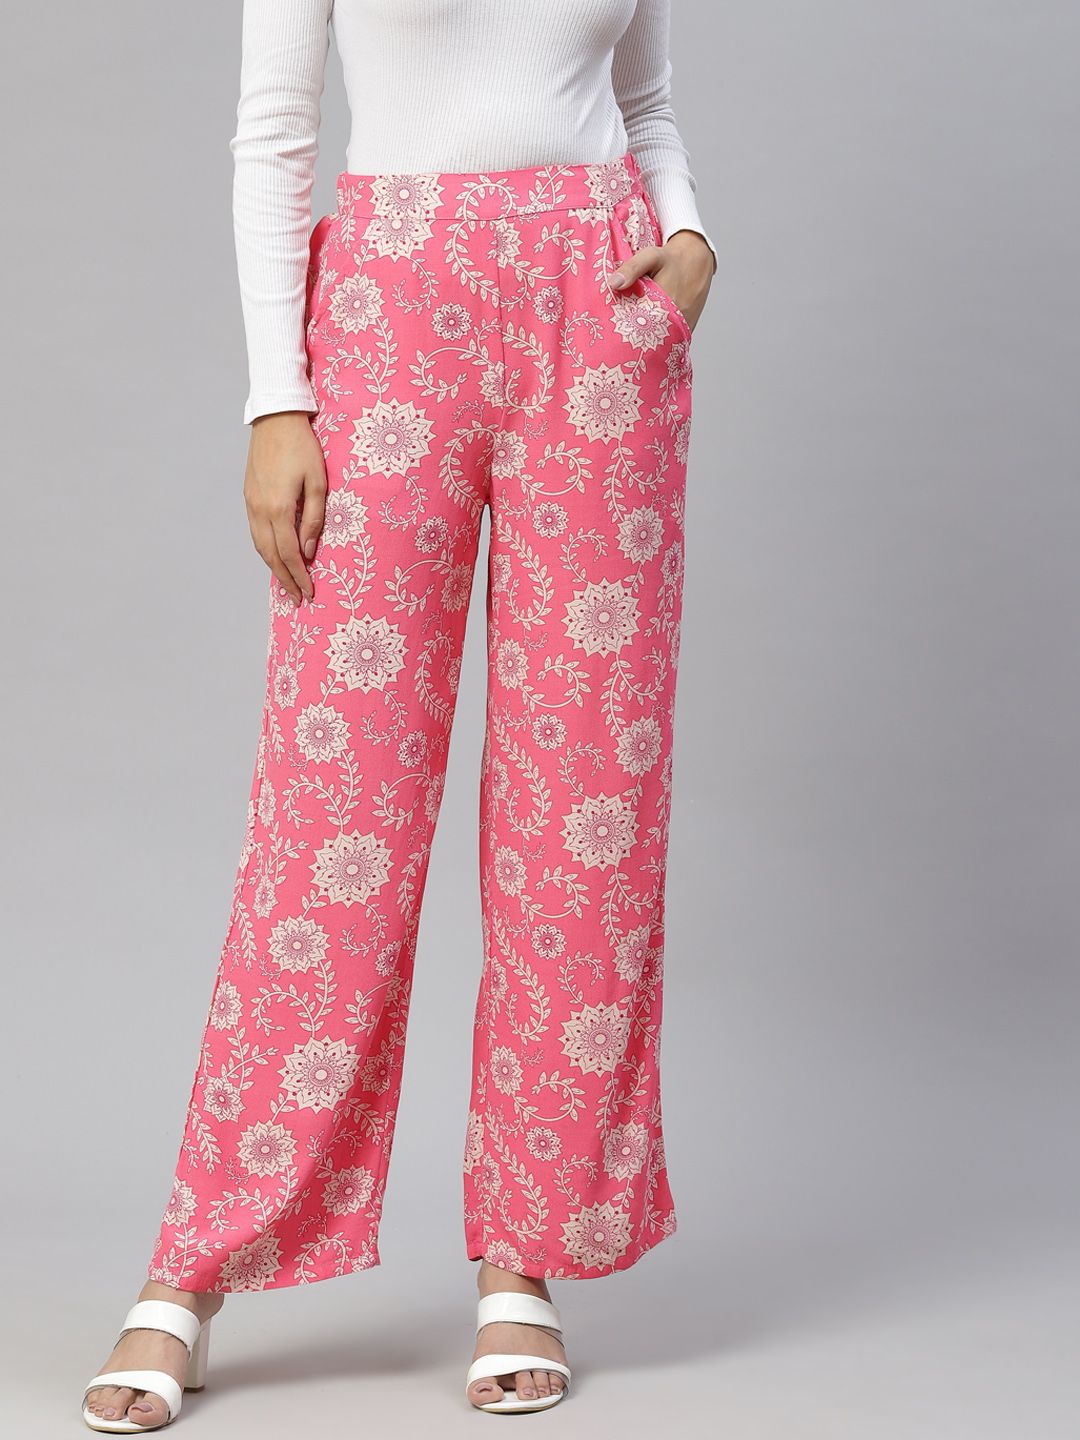 Marks & Spencer Women Pink & Cream-Coloured Ethnic Motifs Printed High-Rise Trousers Price in India